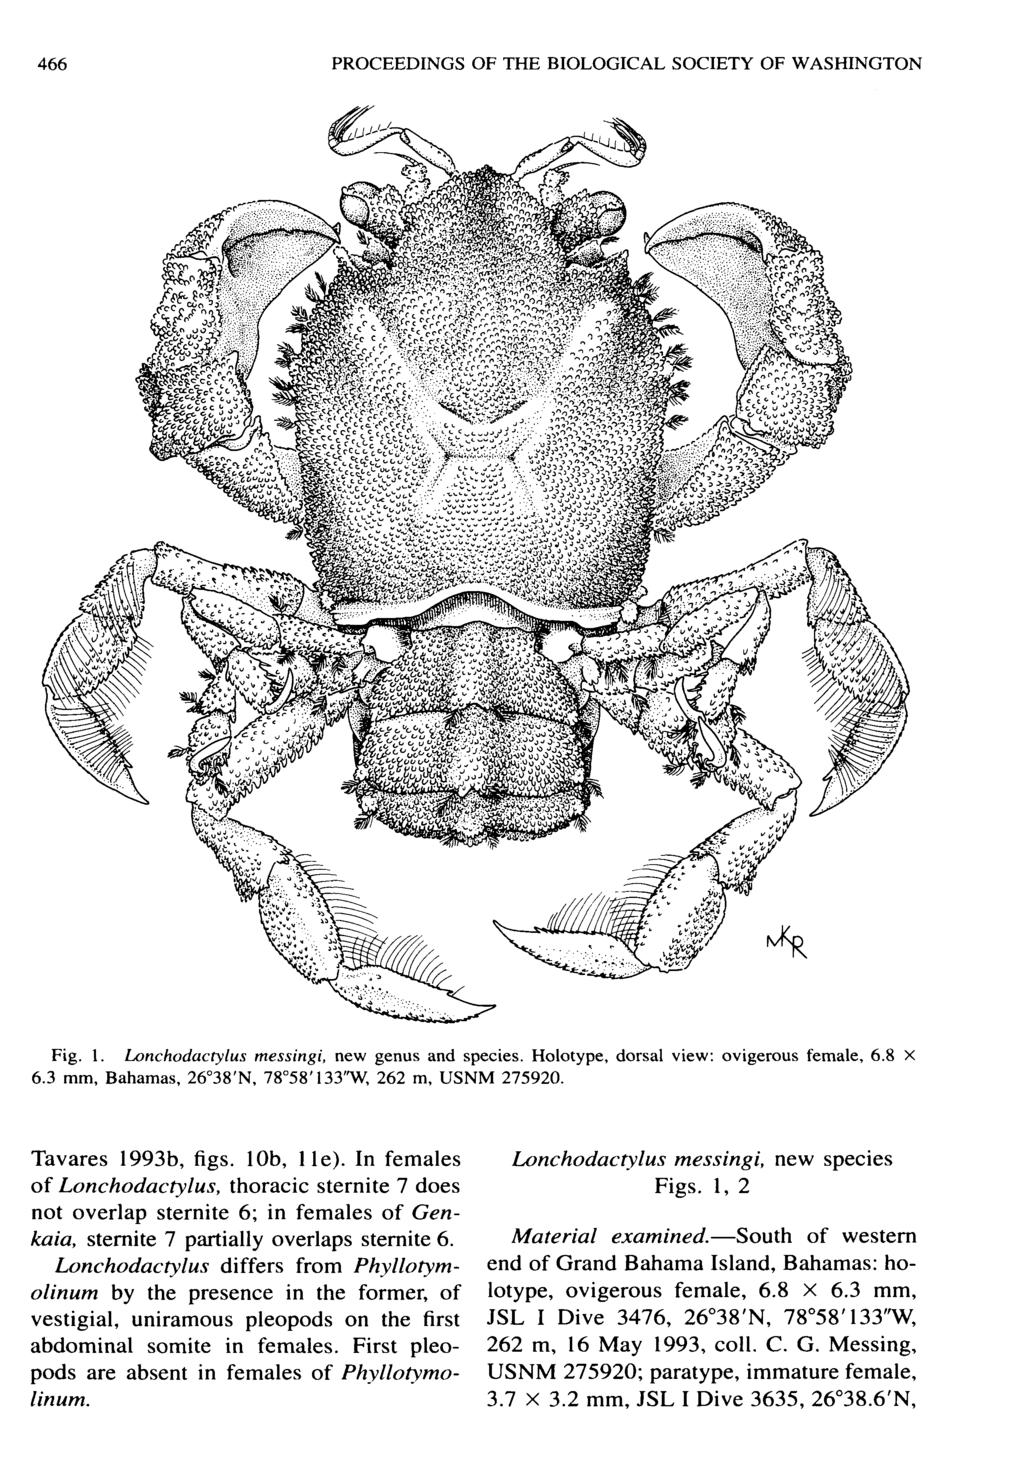 466 PROCEEDINGS OF THE BIOLOGICAL SOCIETY OF WASHINGTON Fig. L Lonchodactylus messingi, new genus and species. Holotype, dorsal view: ovigerous female, 6.8 X 6.